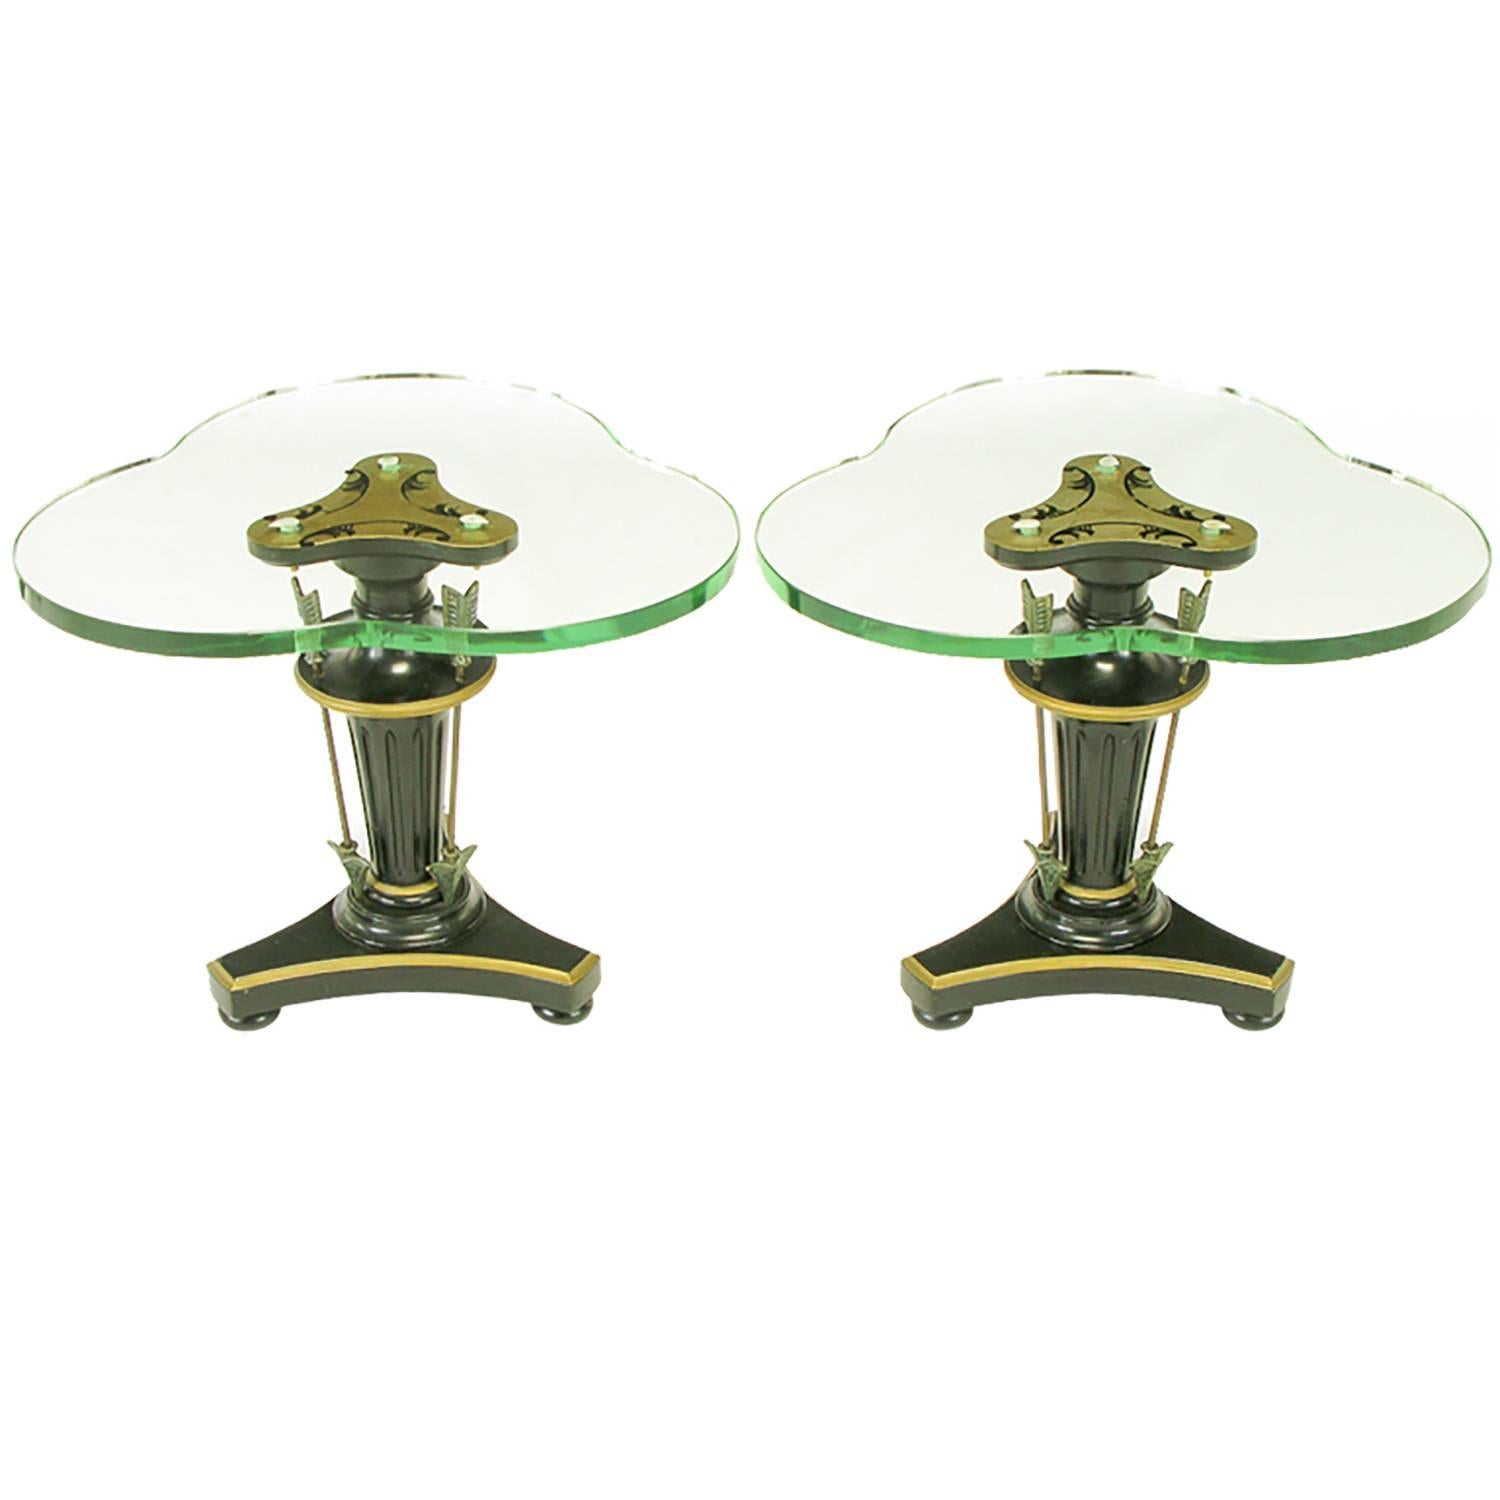 Pair of Black Lacquer & Parcel Gilt Empire Side Tables with Arrow Details